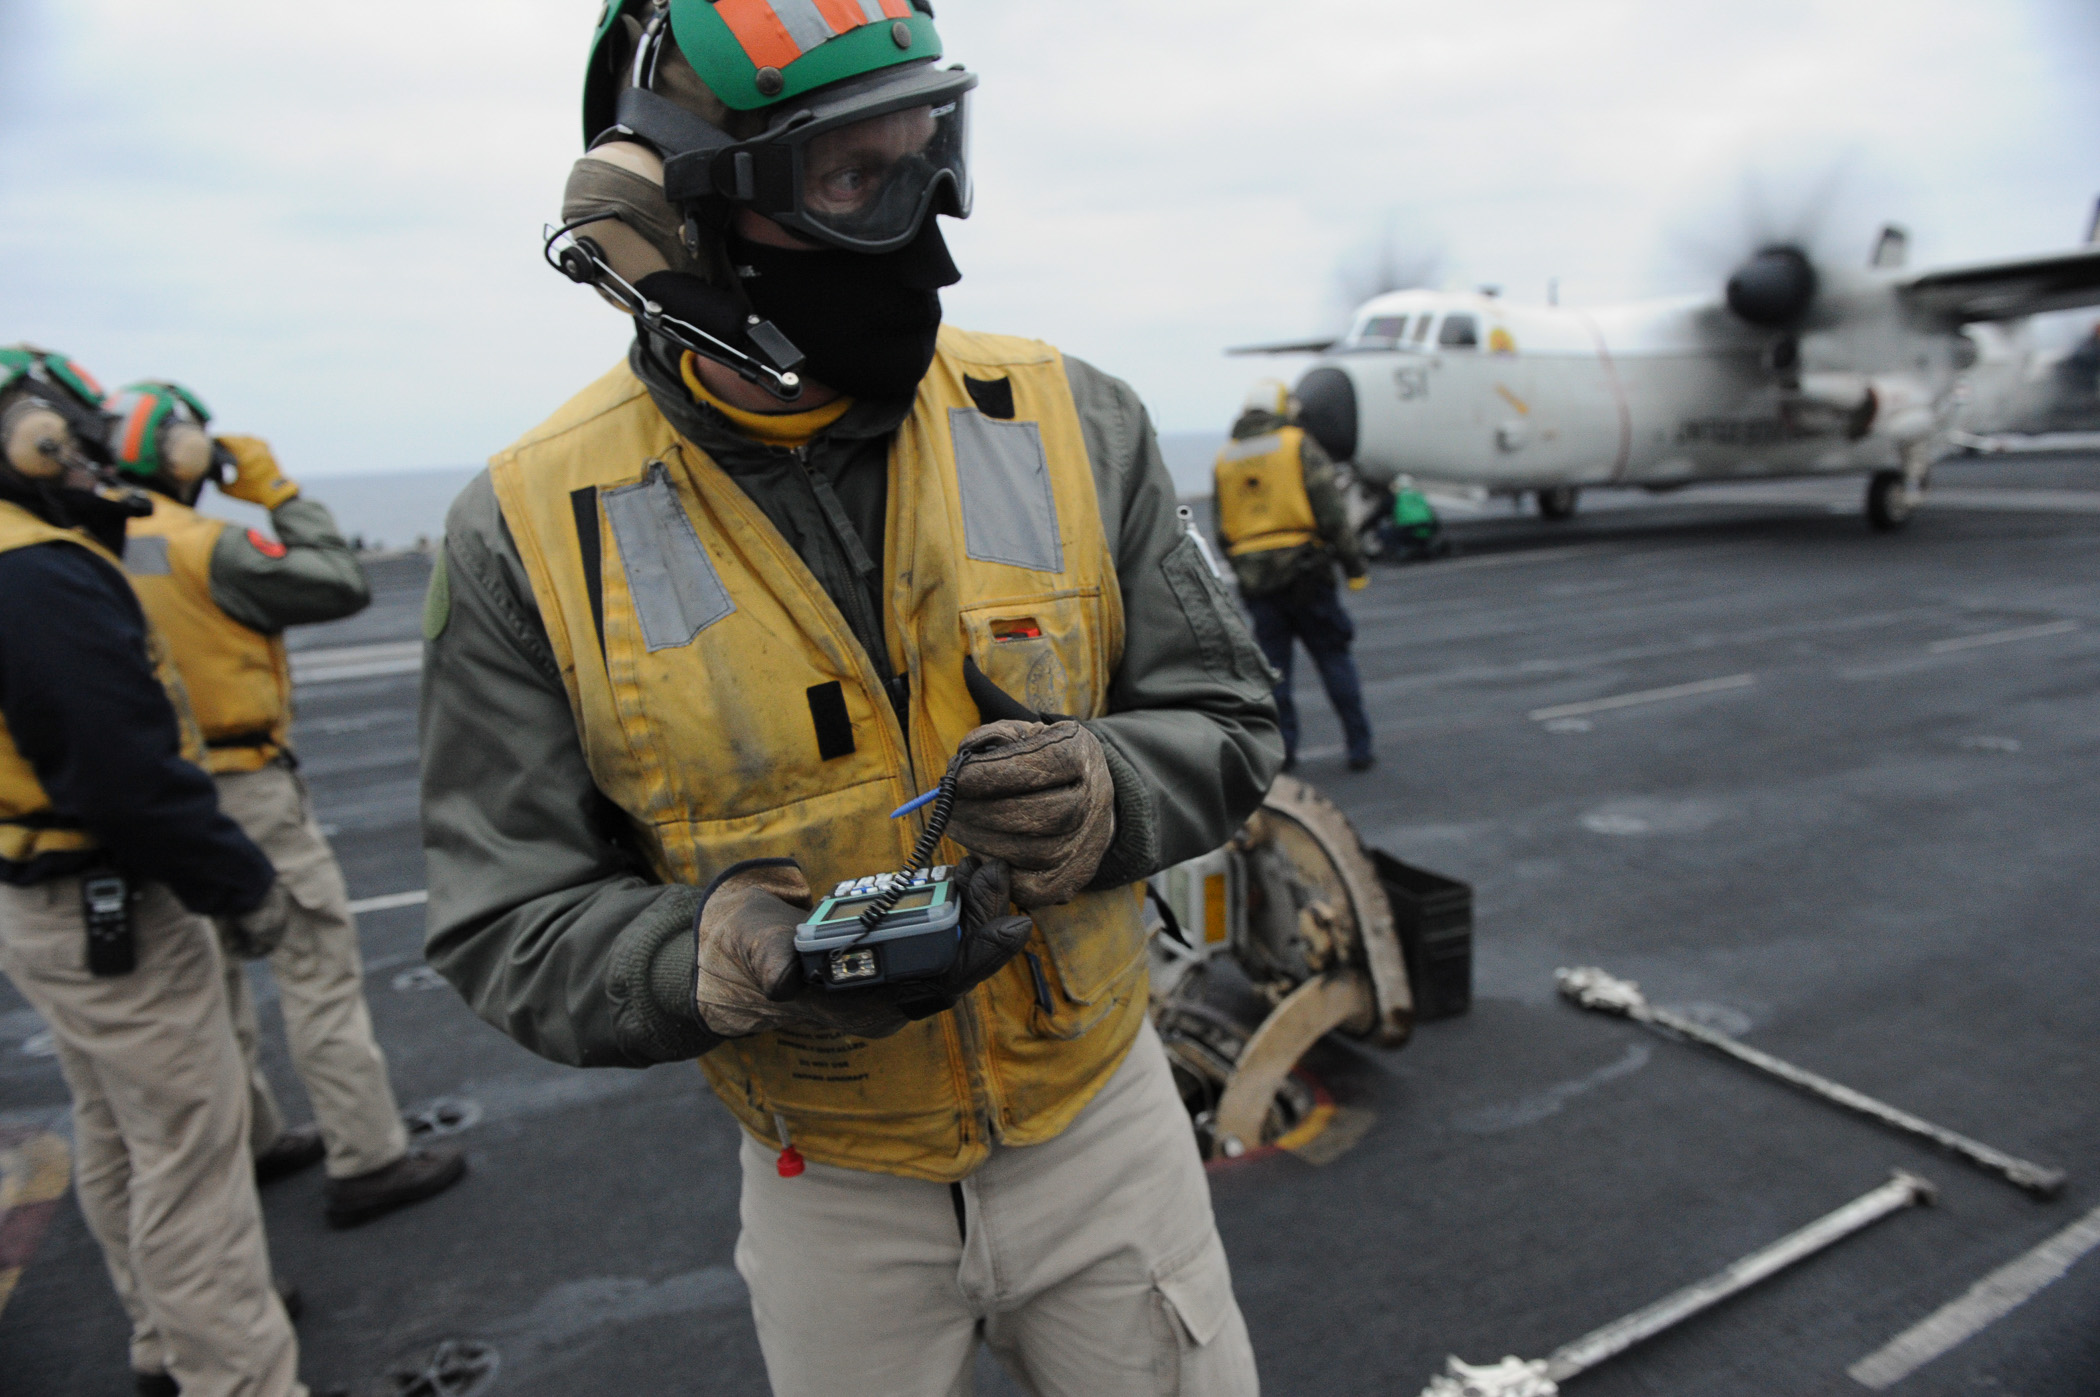    ATLANTIC OCEAN &nbsp;- Lt. Andrew Wiese evaluates a catapult capacity selector valve (CSV) calculator provided by the Office of Naval Research during flight operations aboard the aircraft carrier USS Harry S. Truman (CVN 75). The CSV calculator is